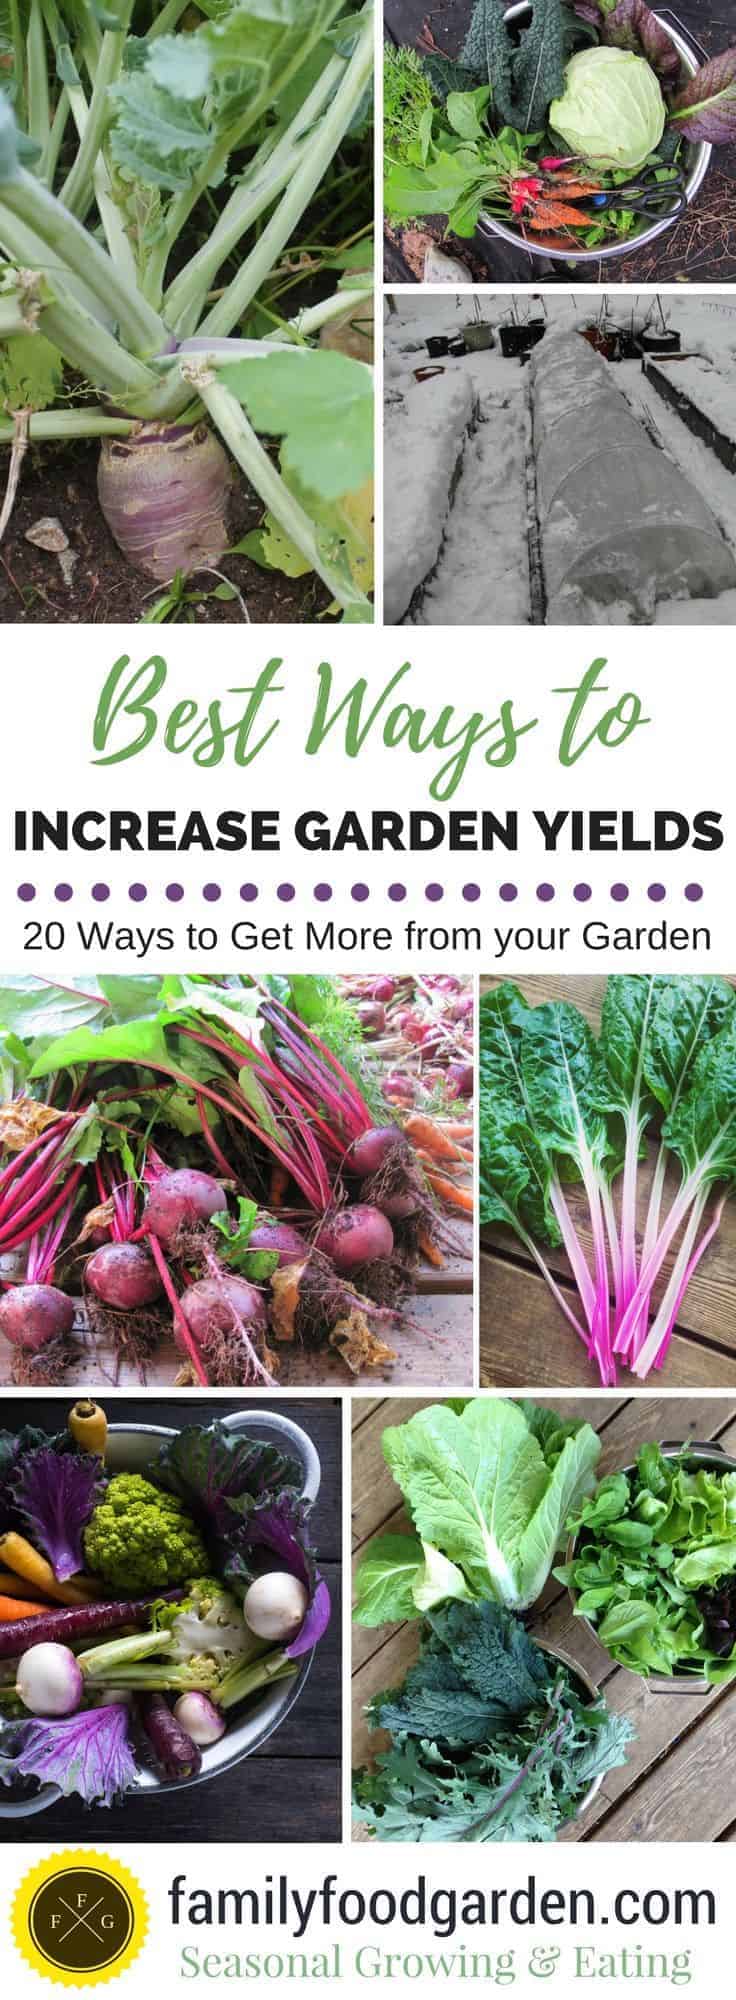 Increase your vegetable gardening yields with these great tips